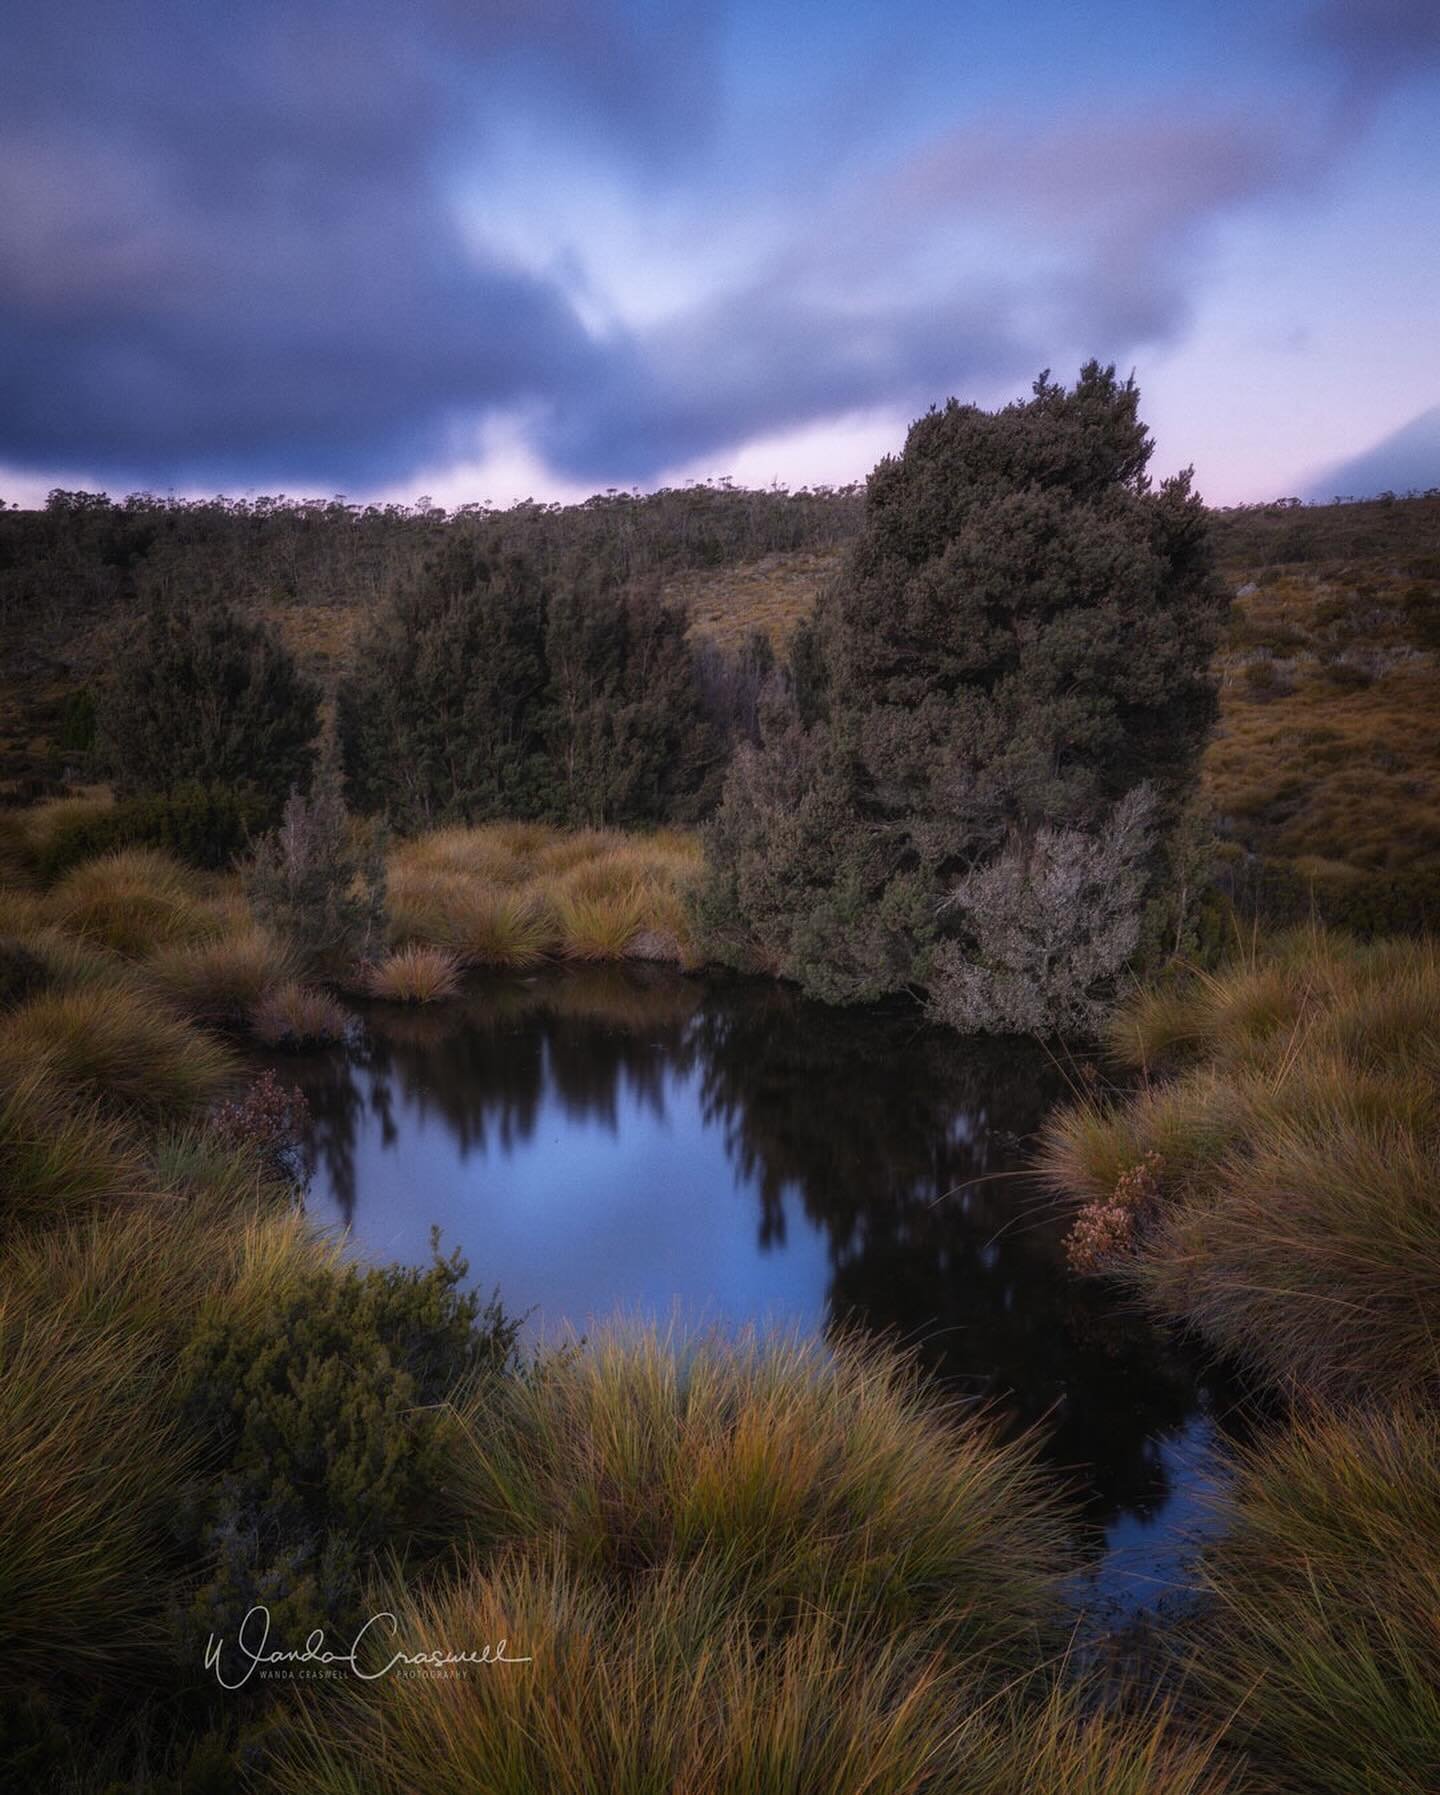 Cradle Mountain in Tasmania has SO much to offer the photographer: yes, there is the famous Dove Lake boatshed, there is the unique silhouette shape of the cradle on the mountain&hellip;.but there is also dense green lush forest, tiny flowers, beauti